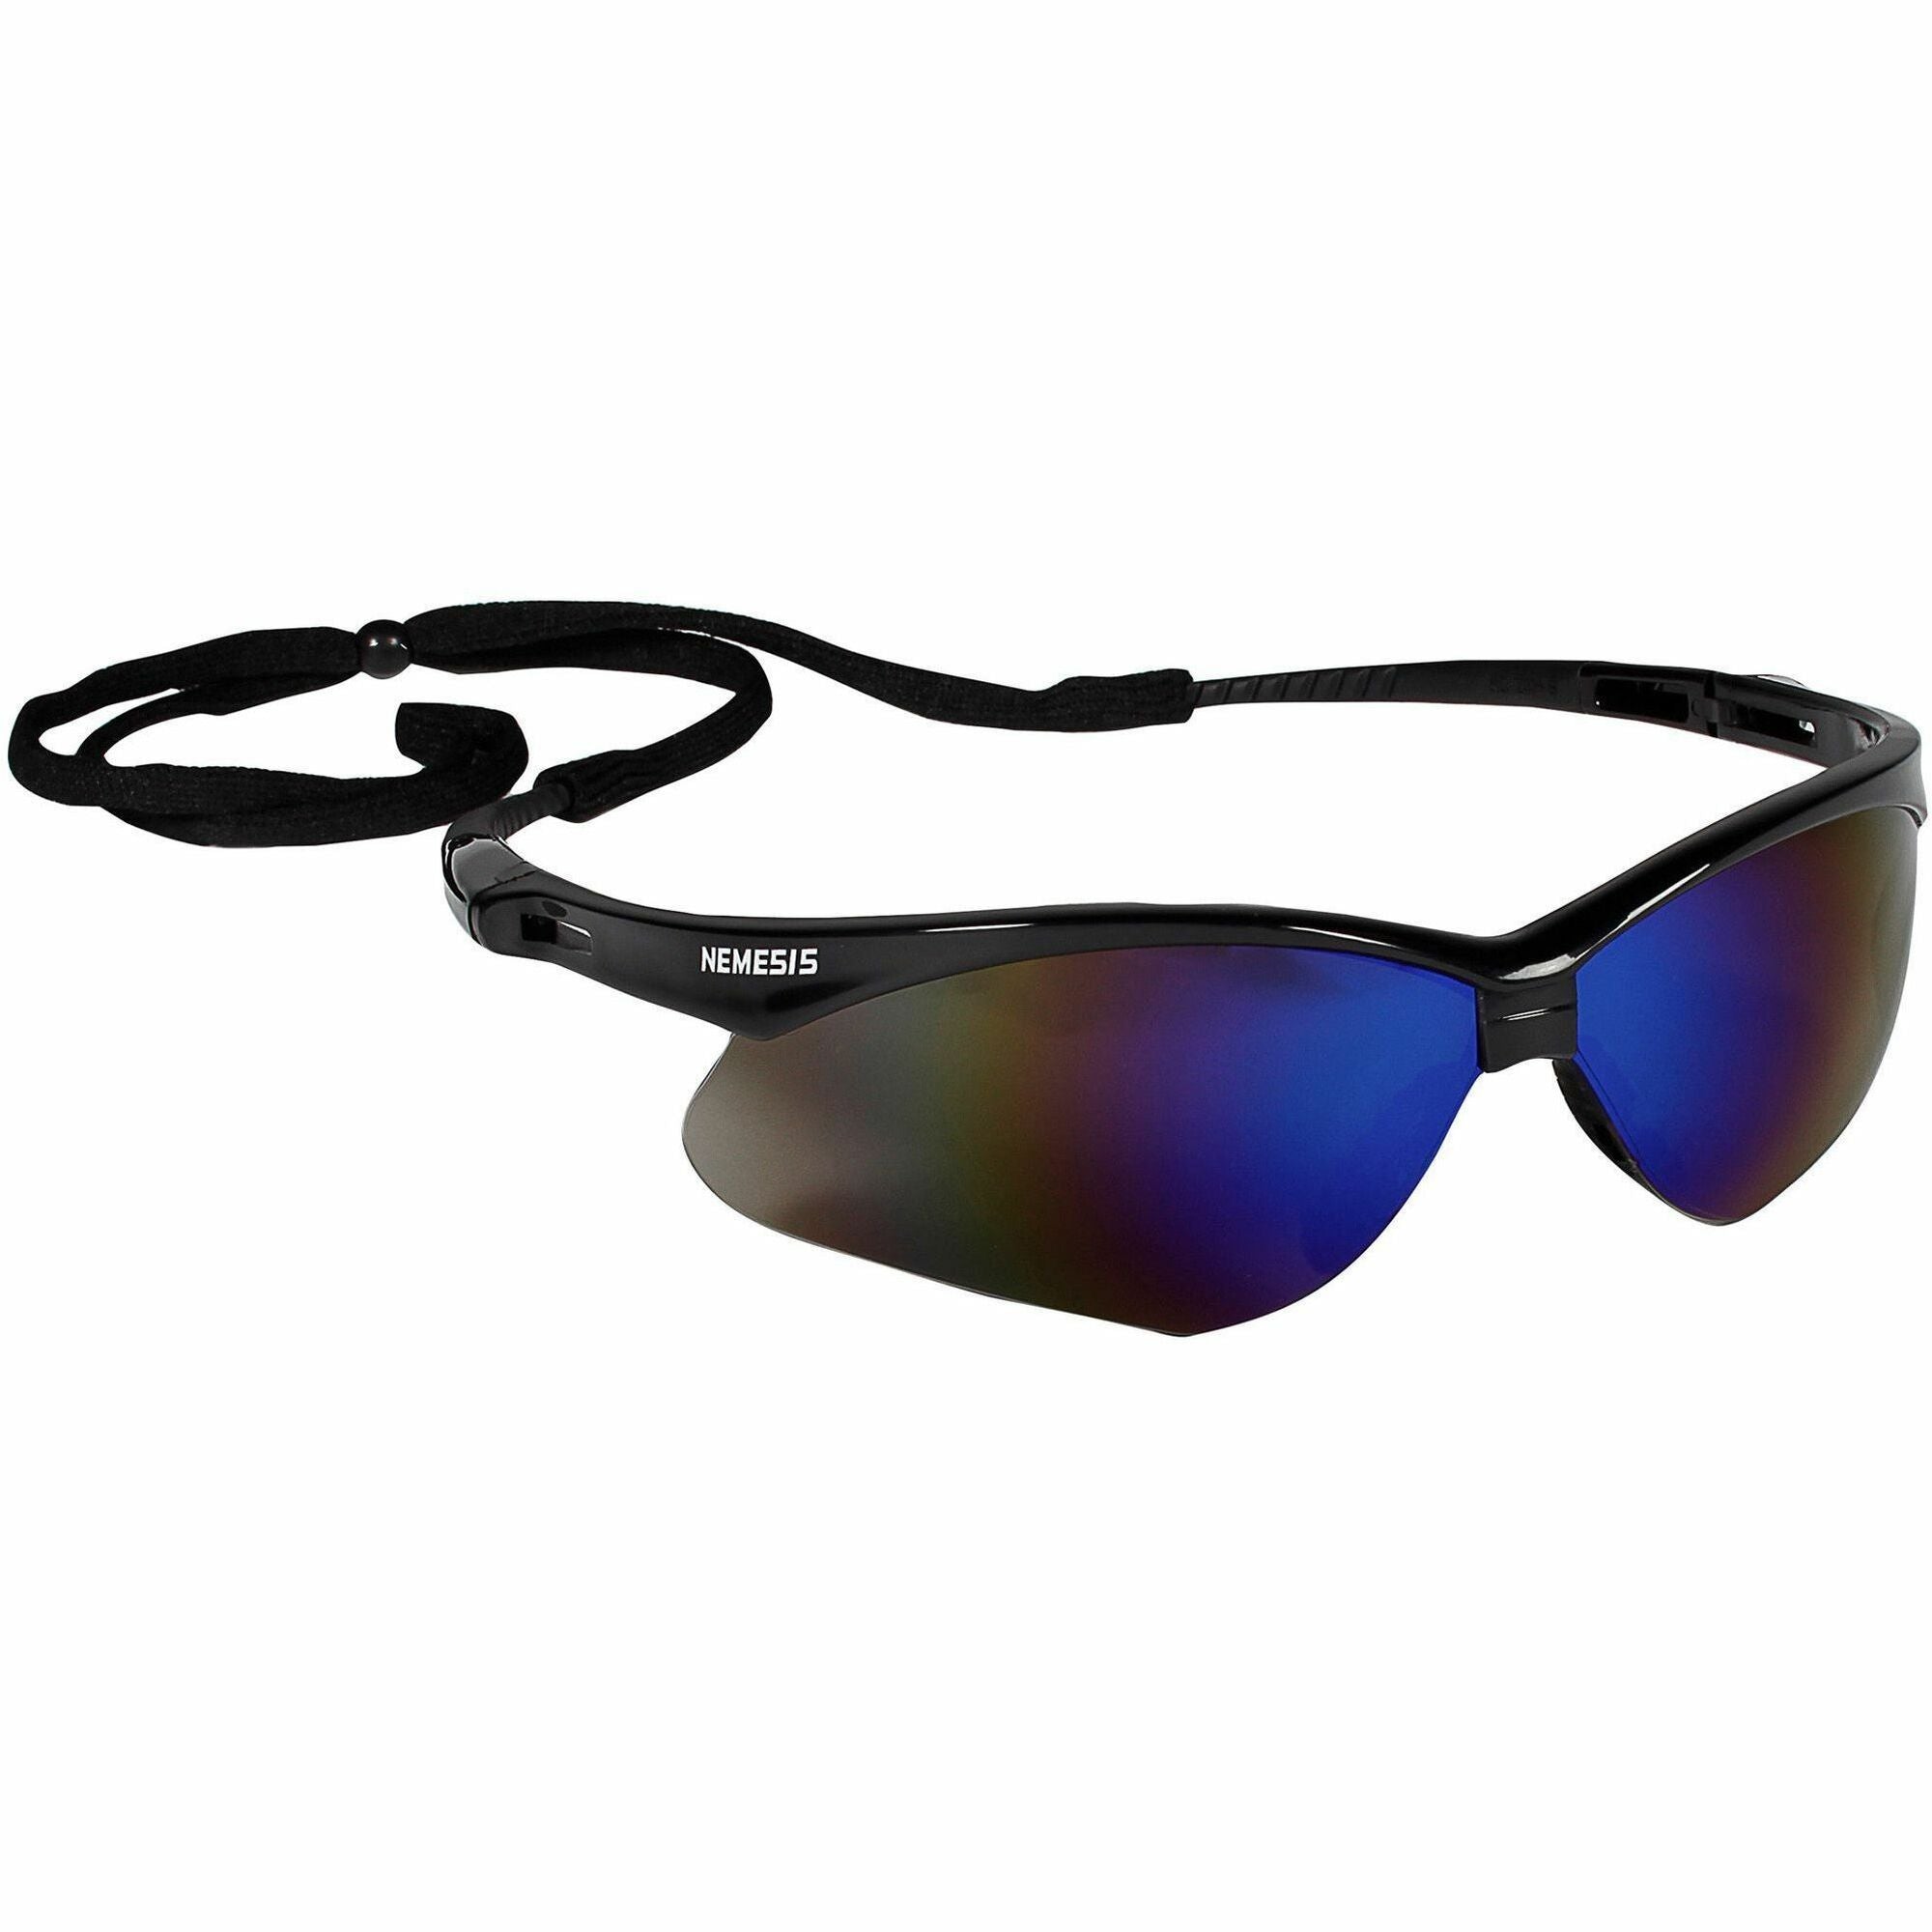 kleenguard-v30-nemesis-safety-eyewear-recommended-for-workplace-home-uva-uvb-uvc-protection-polycarbonate-durable-lightweight-wraparound-frame-anti-fog-flexible-soft-neck-cord-12-box_kcc14481bx - 1